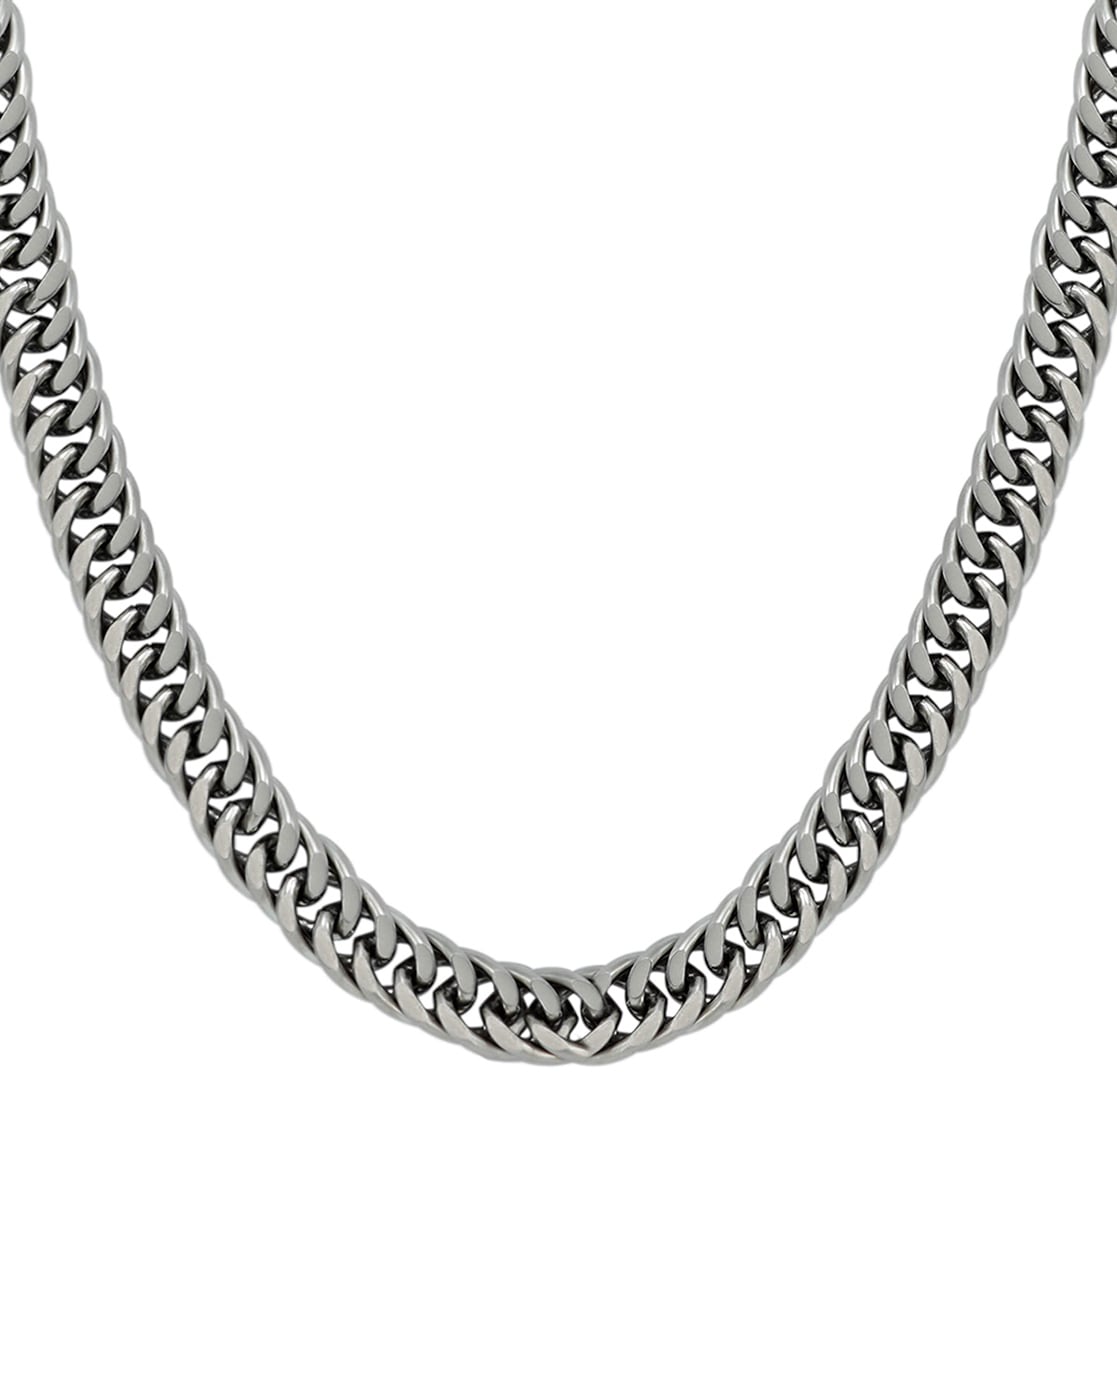 8mm Men's Sterling Silver Curb Chain - Jewelry1000.com | Sterling silver  mens, Silver chain for men, Silver gold jewelry